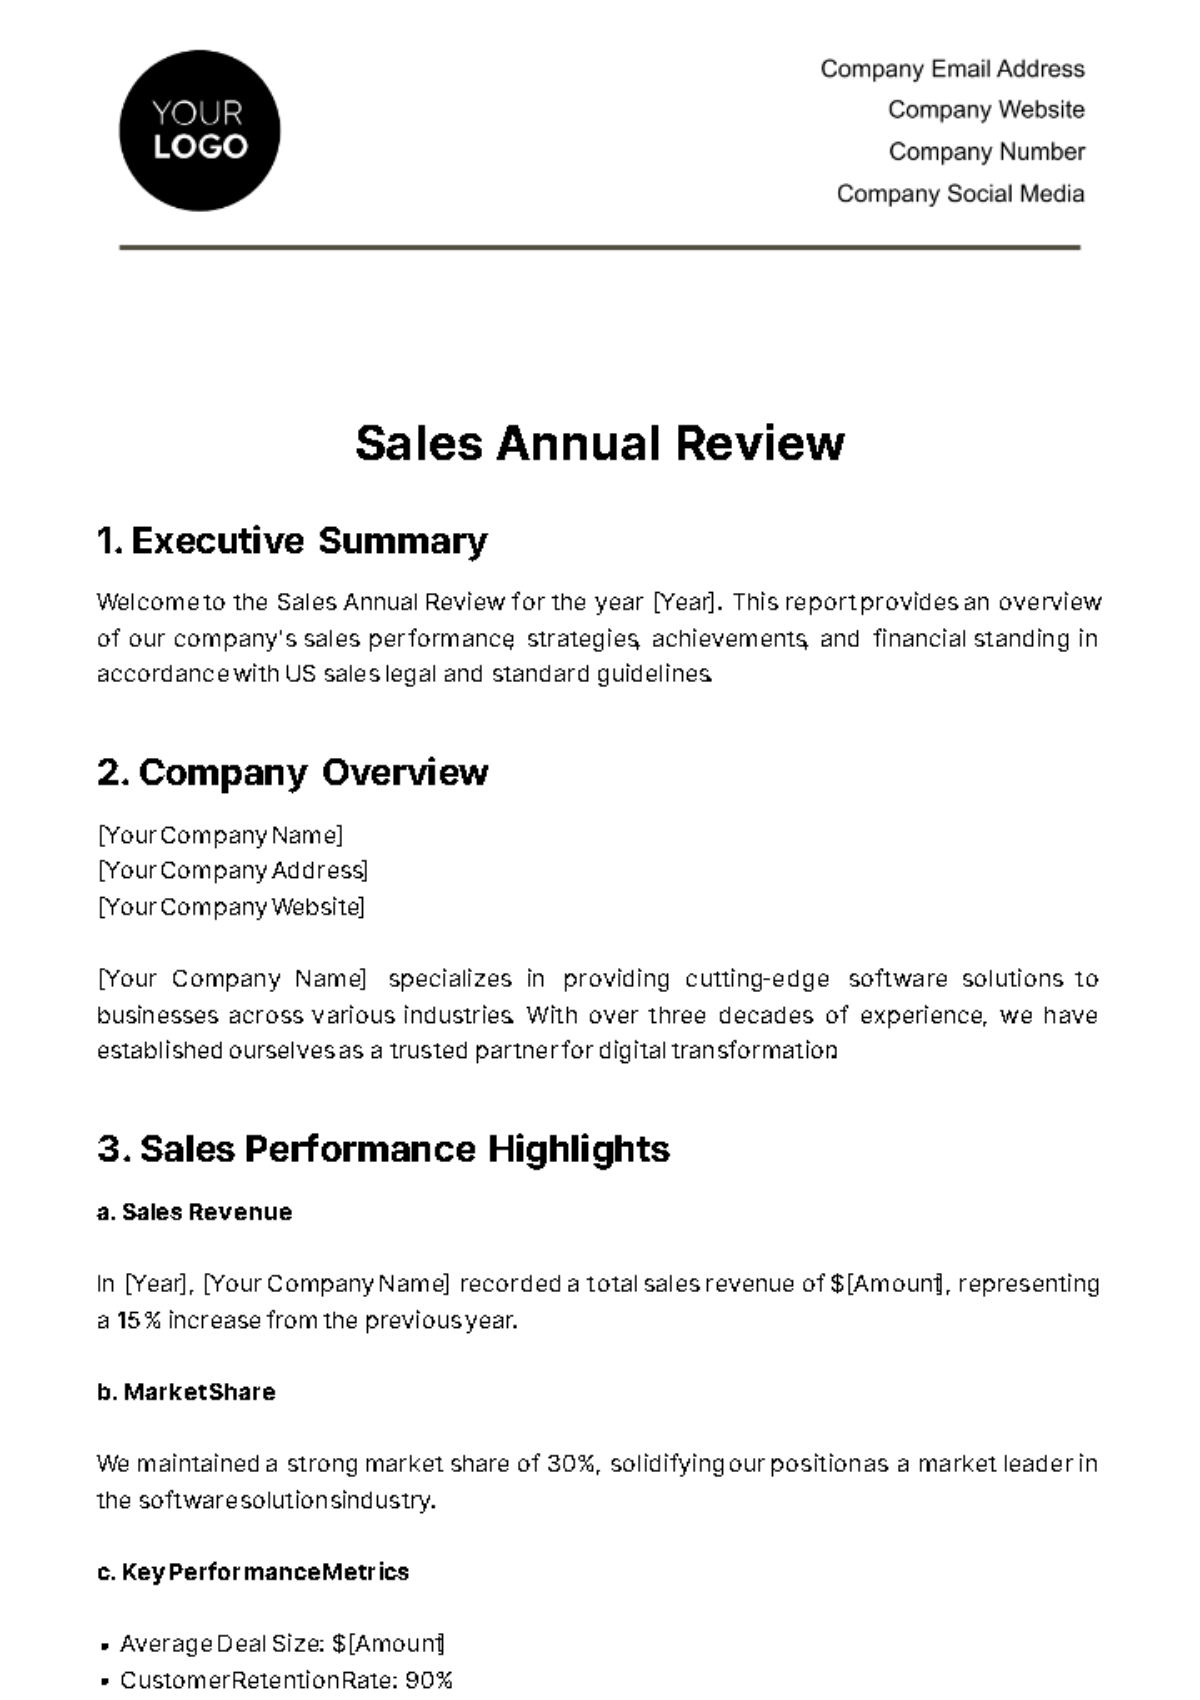 Free Sales Annual Review Template